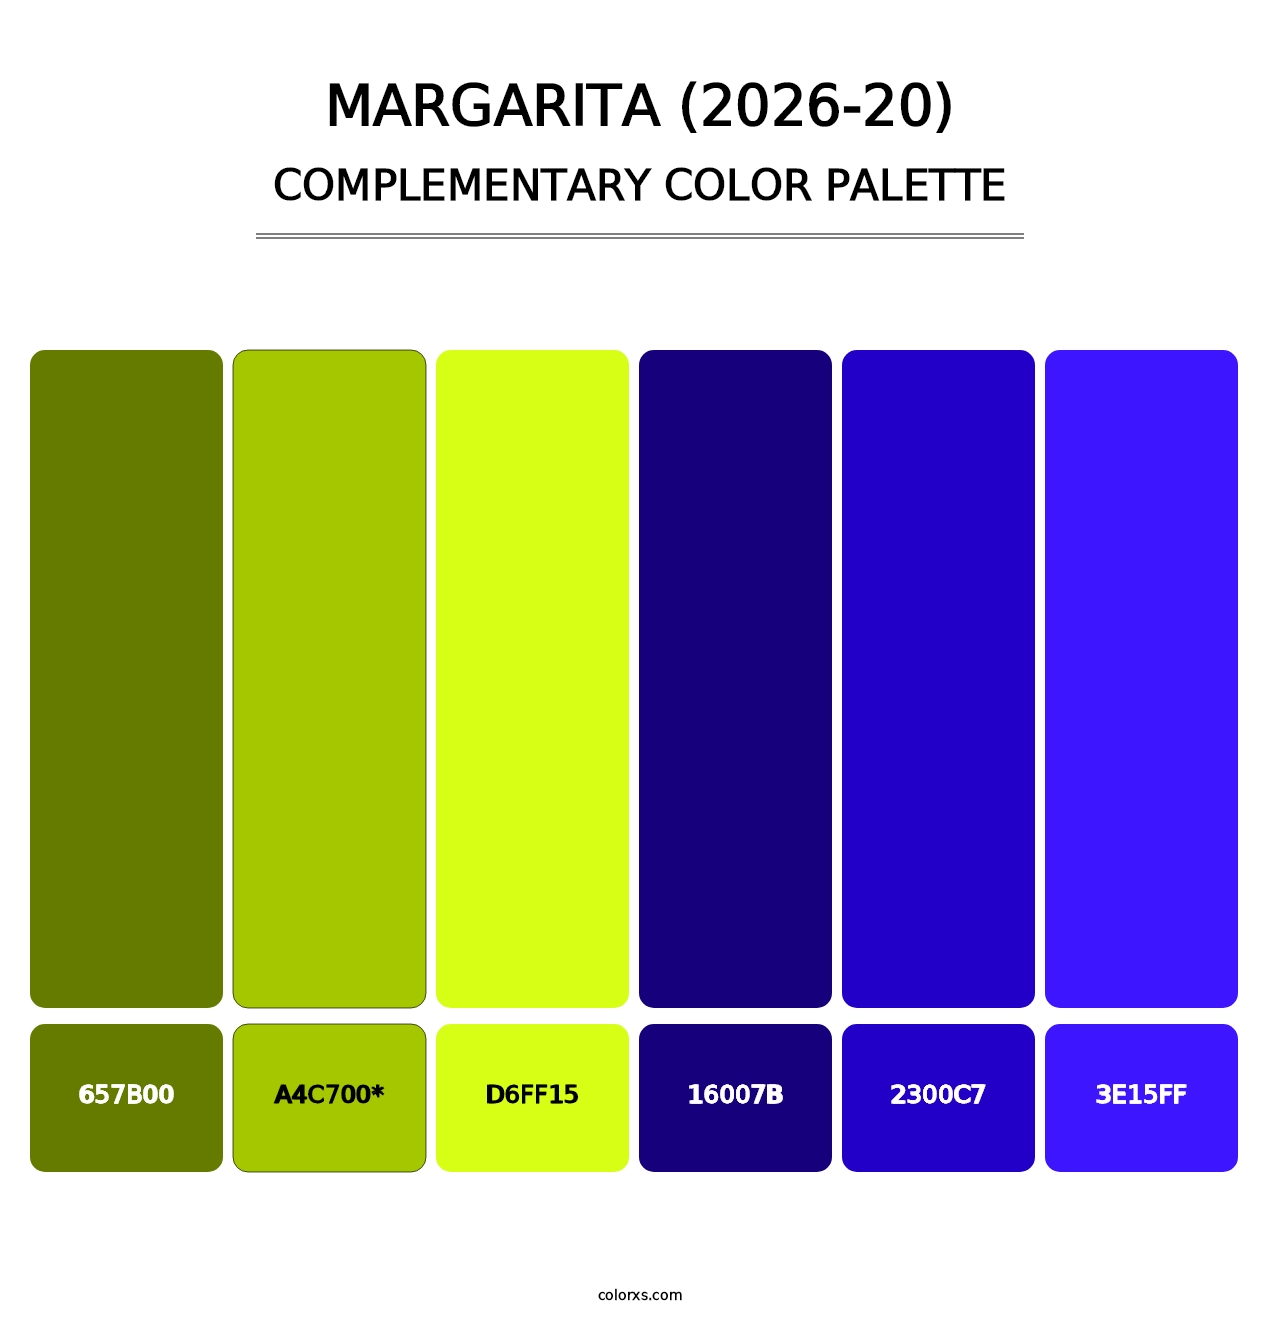 Margarita (2026-20) - Complementary Color Palette